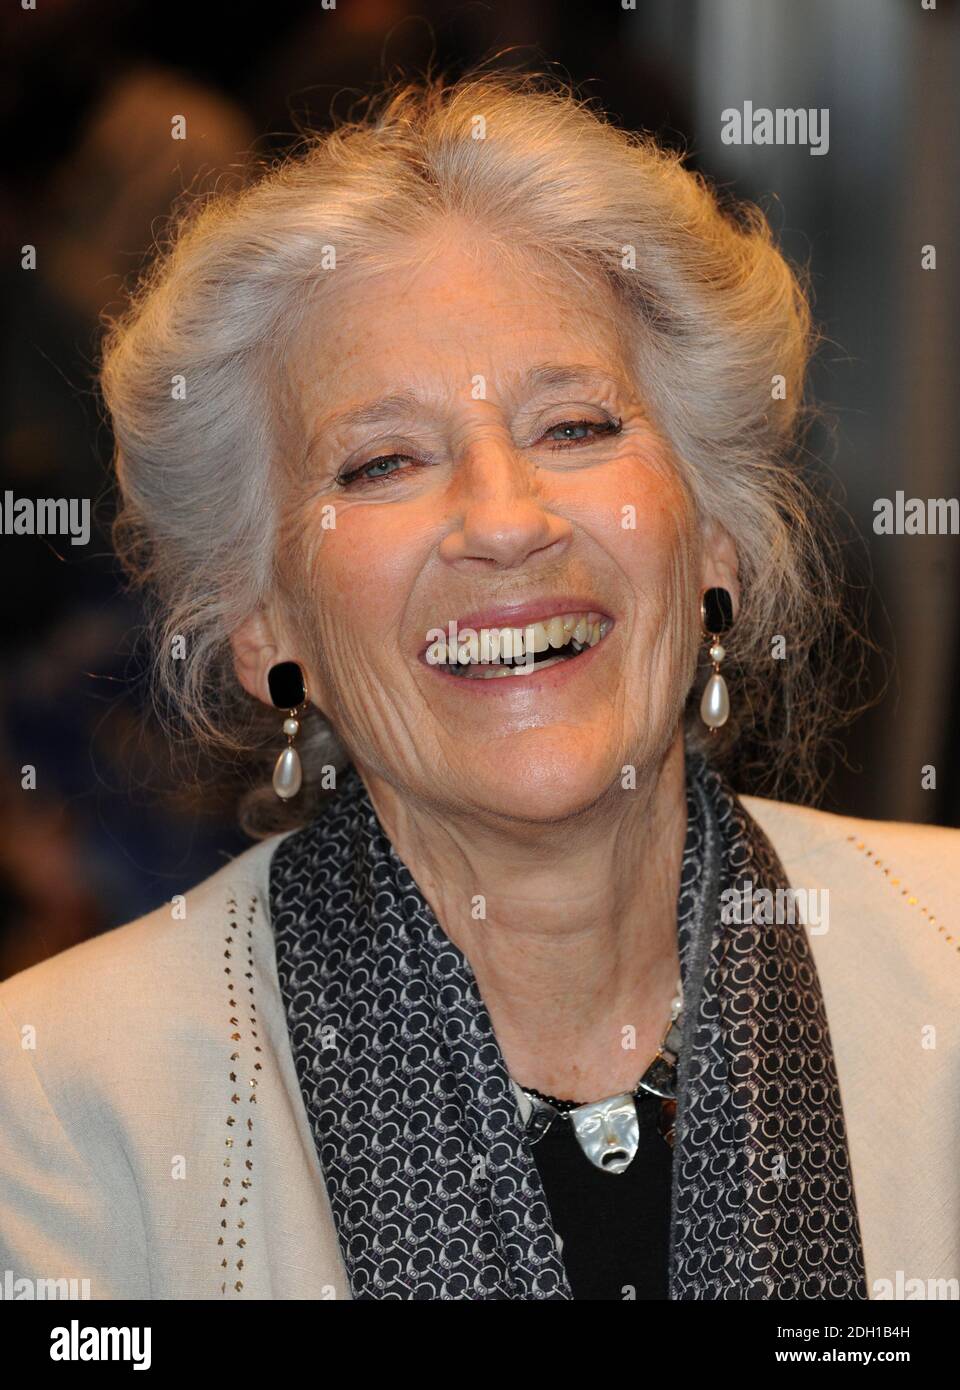 Phyllida Law bei der Weltpremiere von Nanny McPhee und The Big Bang, The Odeon West End Cinema, Leicester Square, London. Stockfoto